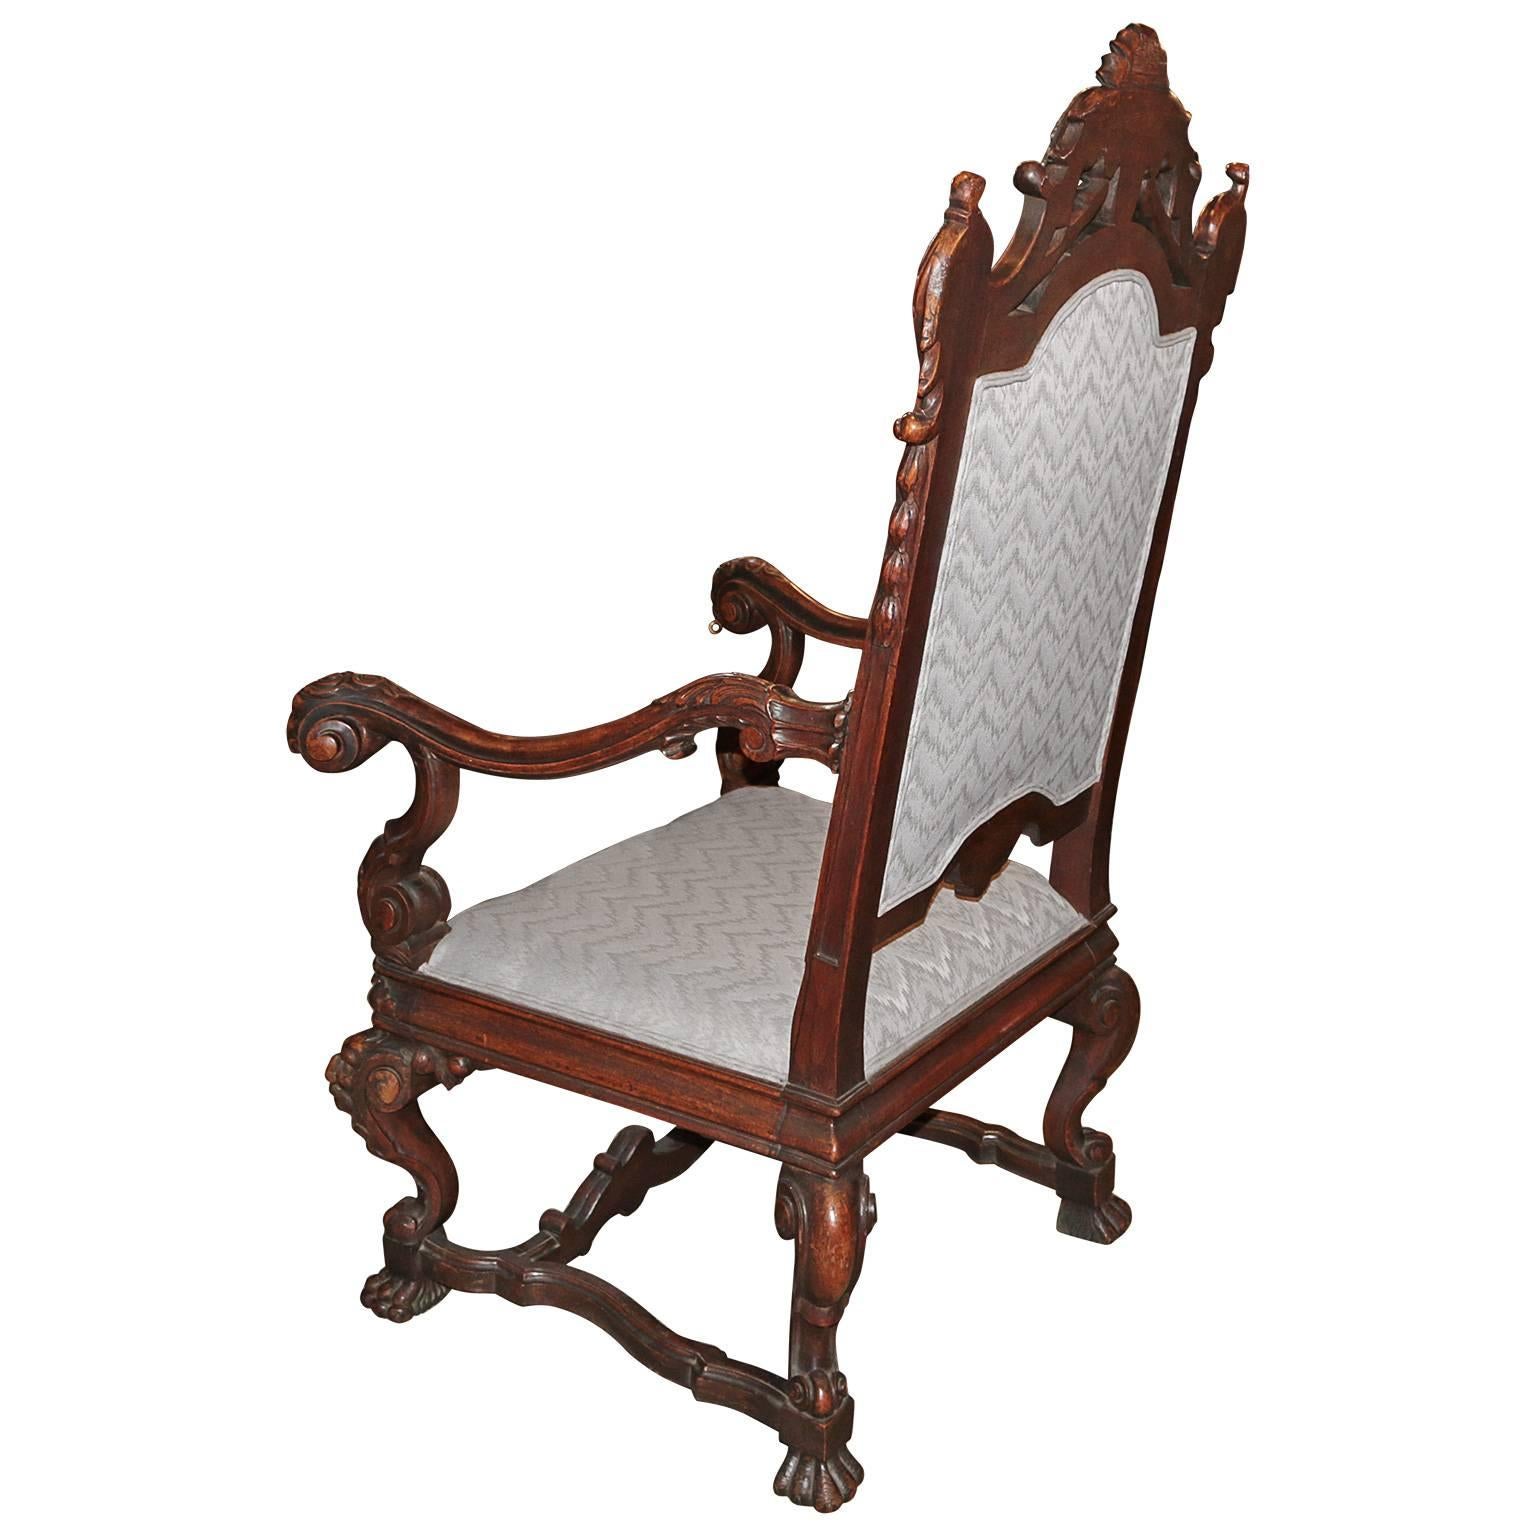 Spanish Colonial Spanish Hand-Carved Kings Chair with 24-karat Gold-Plated Bronze Emblem